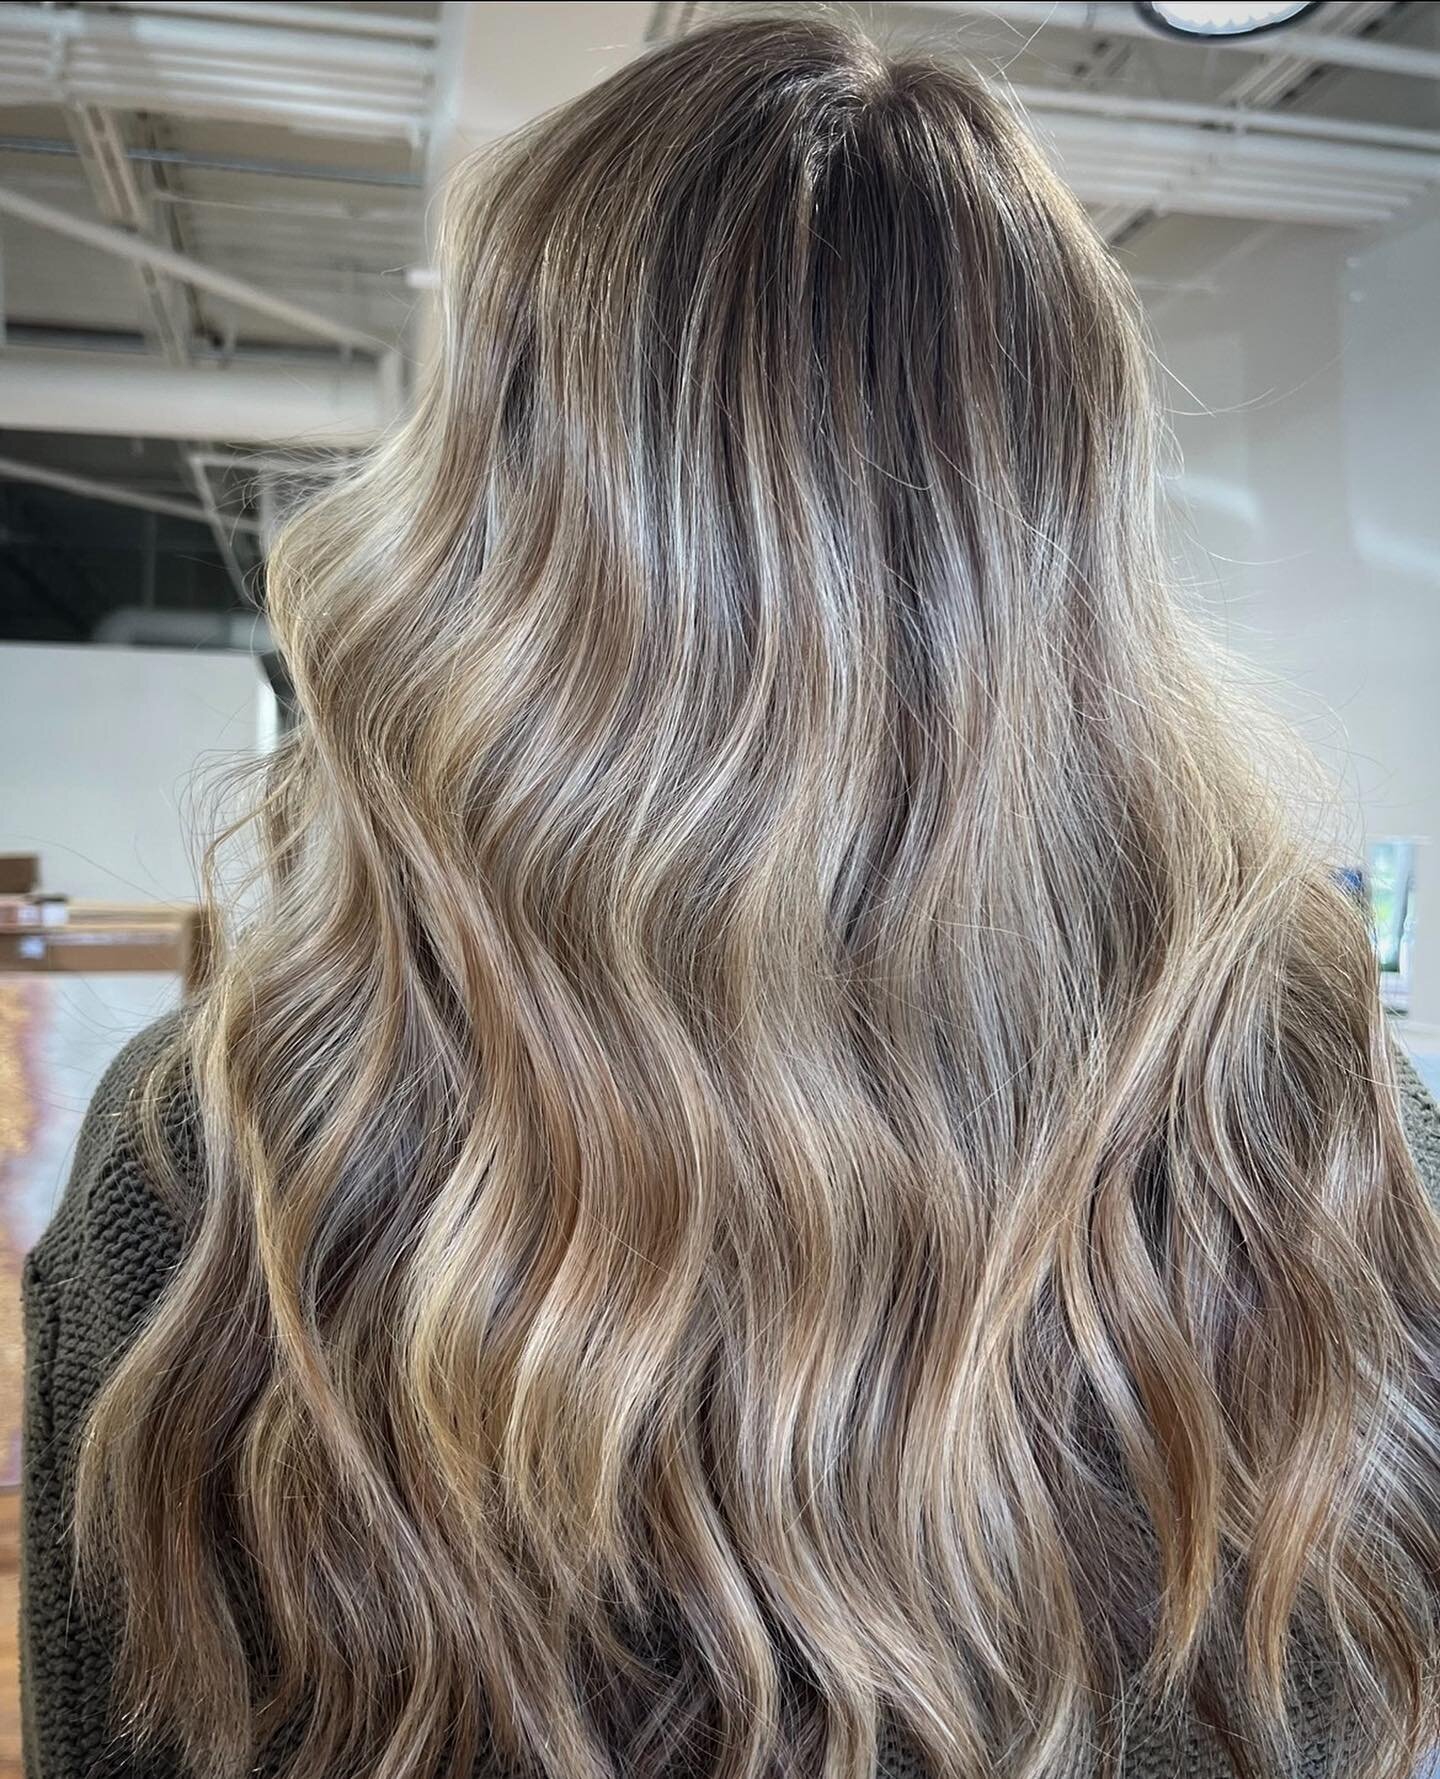 the perfect balance between (warm) 🌞tones + (cool) 🌚 tones⁠
__________________⁠
by our Co-Artist @zsbeautyloft⁠
.⁠
.⁠
For more info on our Co-Artist program, watch our reels as well as shoot us a DM⁠
.⁠
.⁠
⁠
#beautiful⁠
#hairgoals #modernsalon #blo